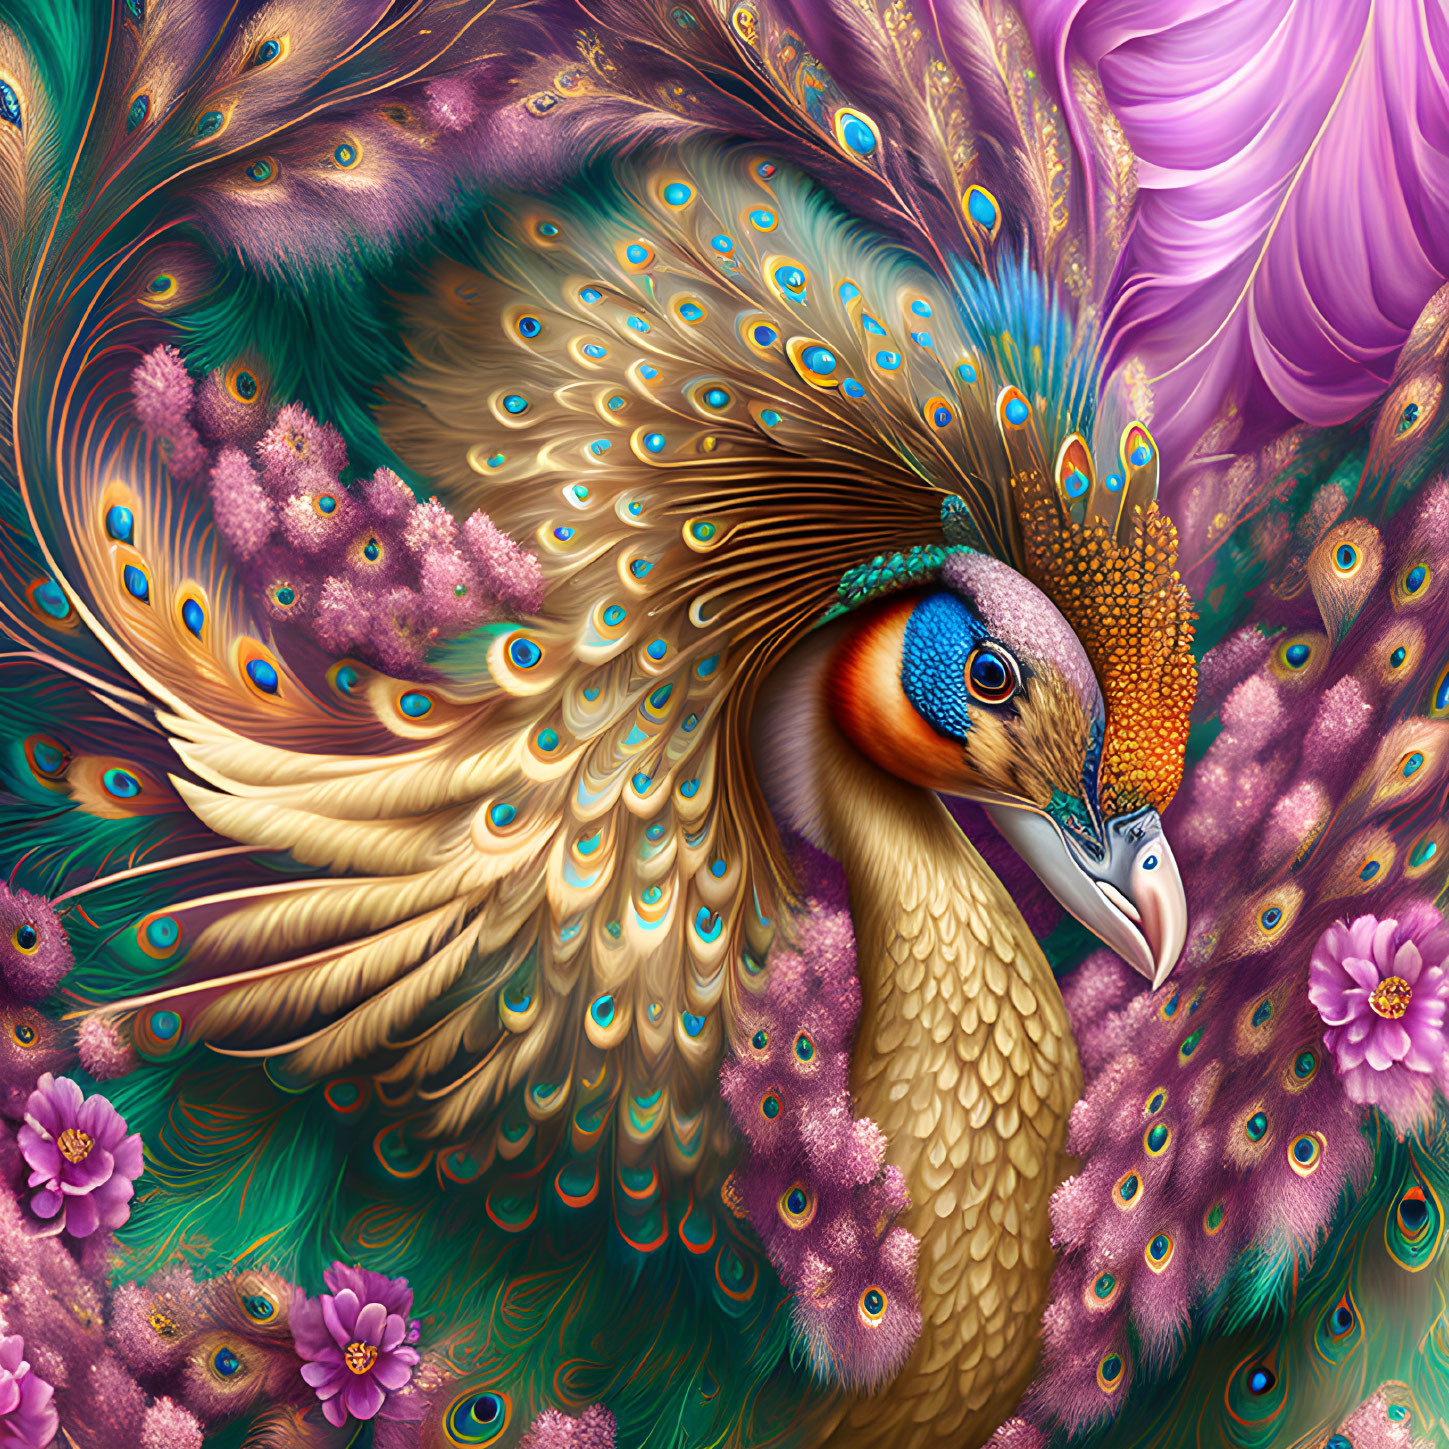 Colorful Peacock Illustration with Detailed Floral Patterns